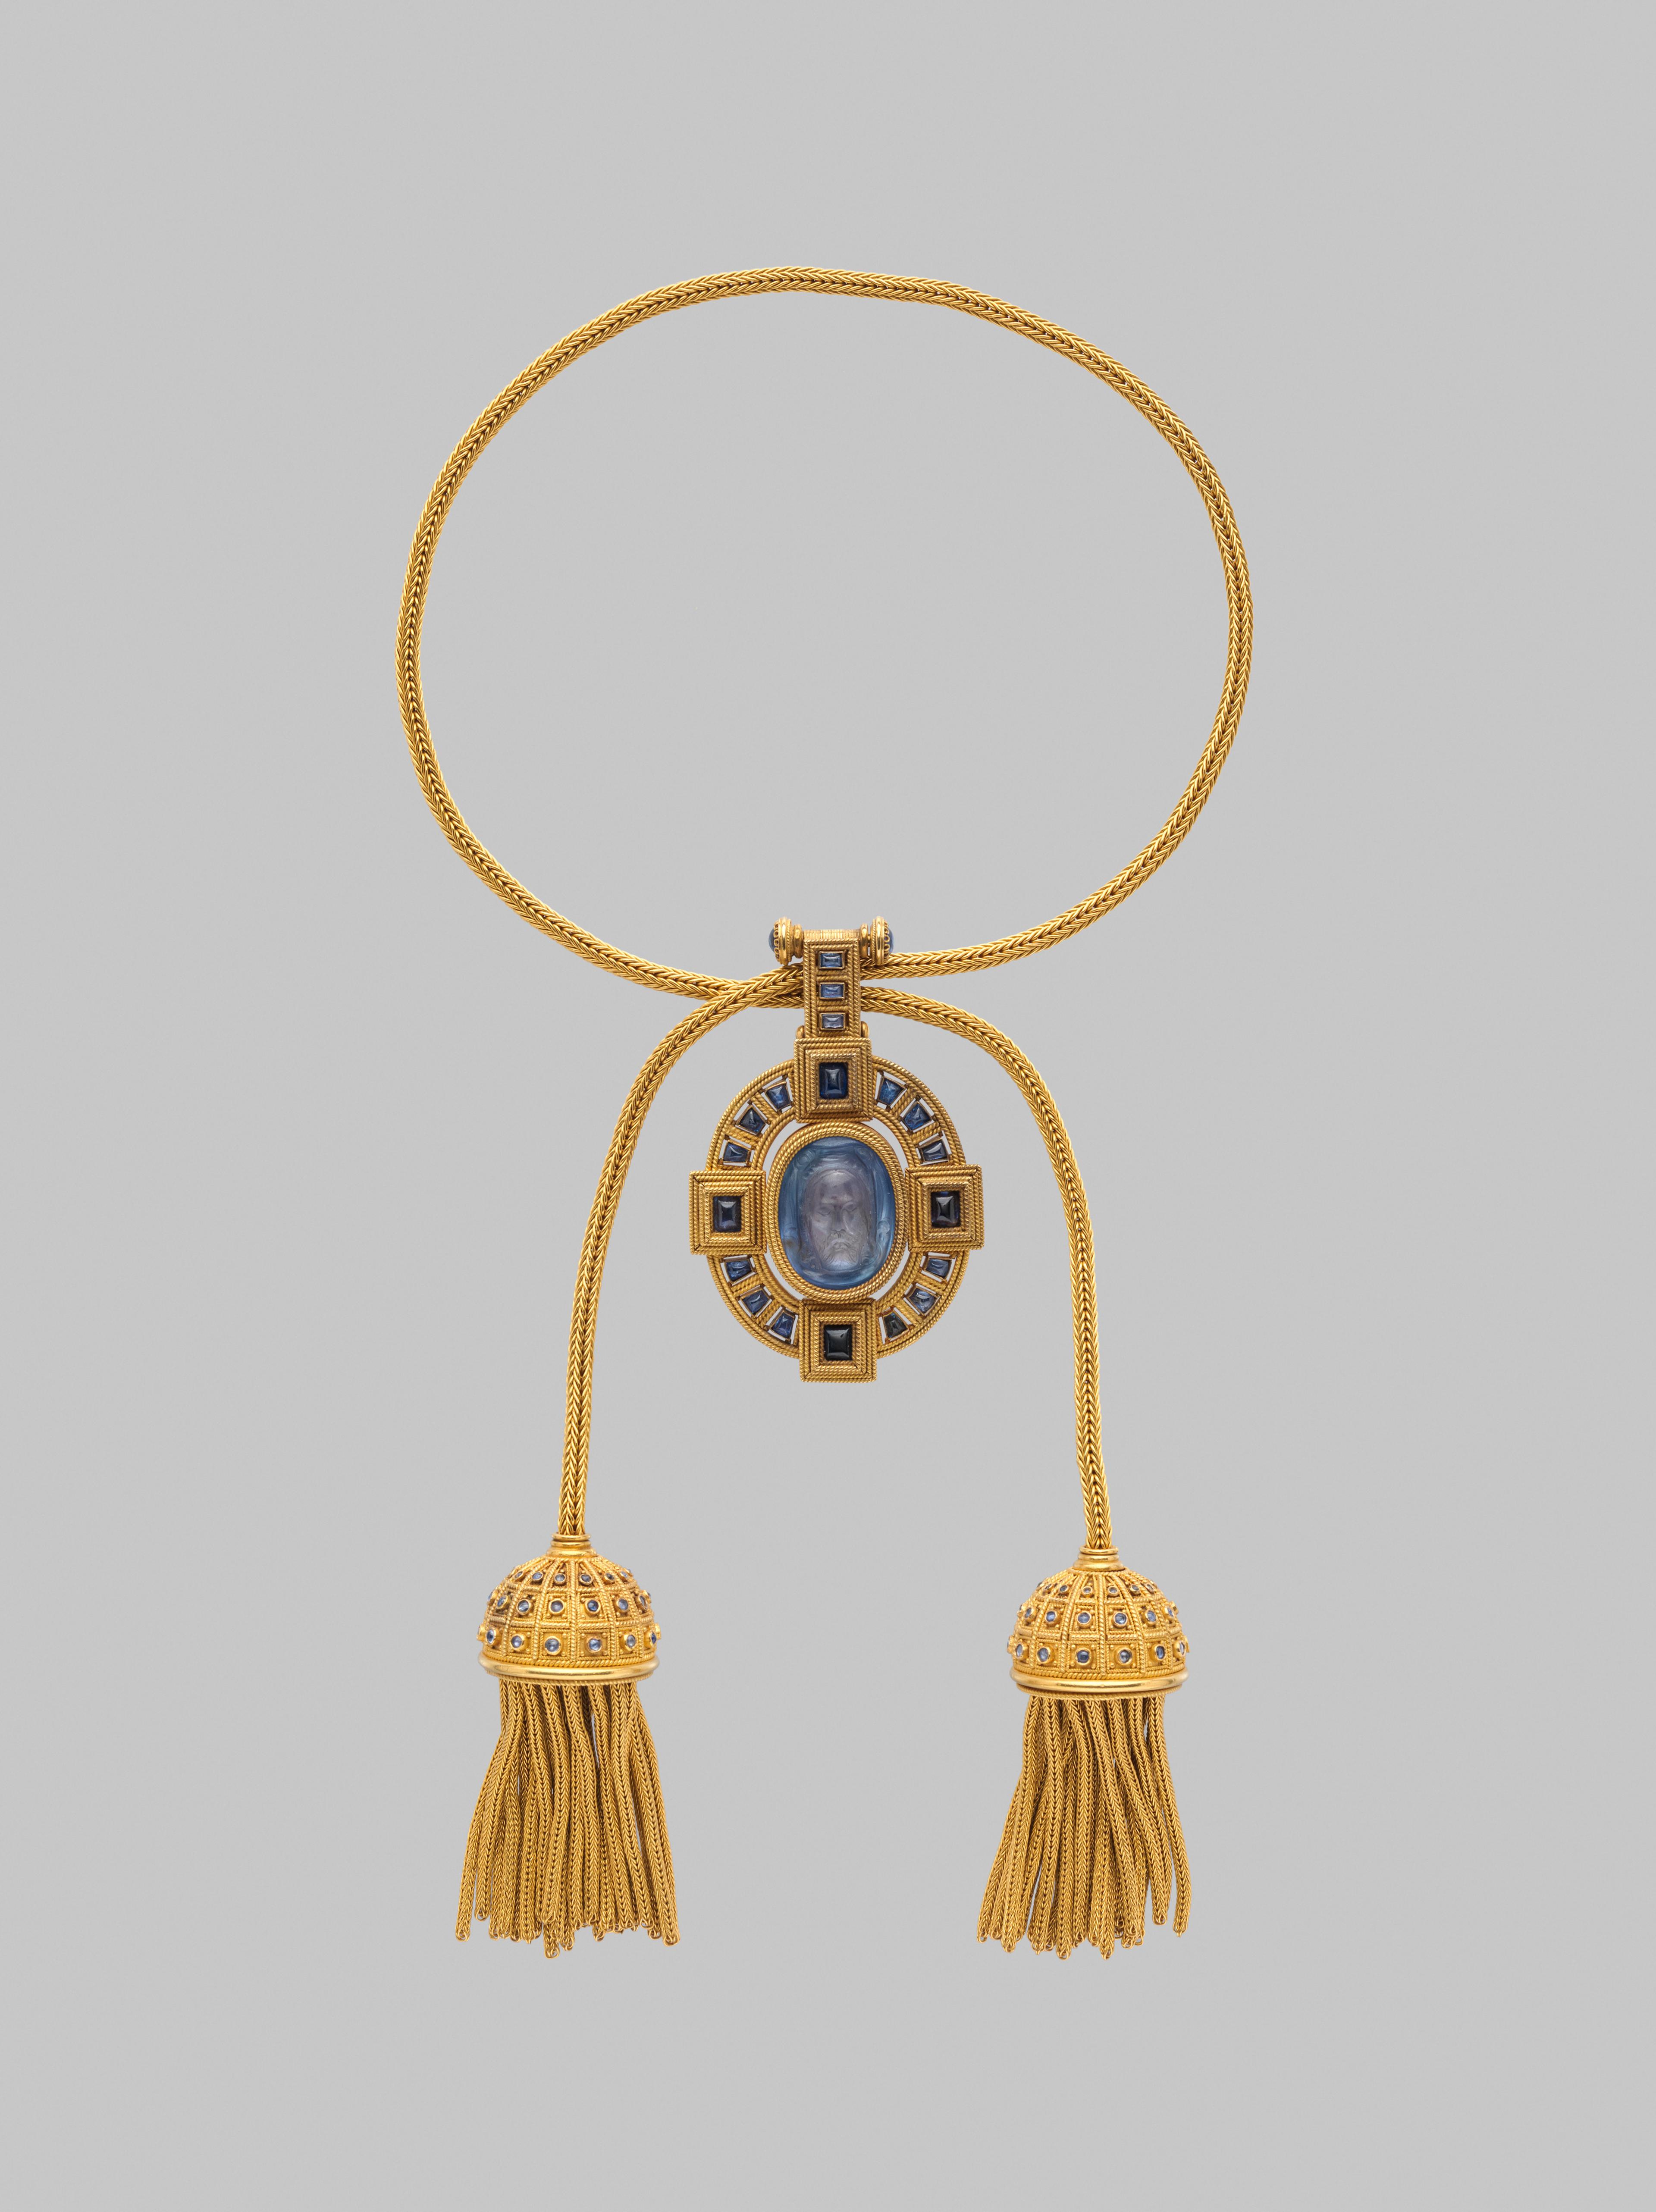 Necklace with cameo of Veronica’s Vail, c. 1870 by Castellani in the collection of the Metropolitan Museum of Art. 